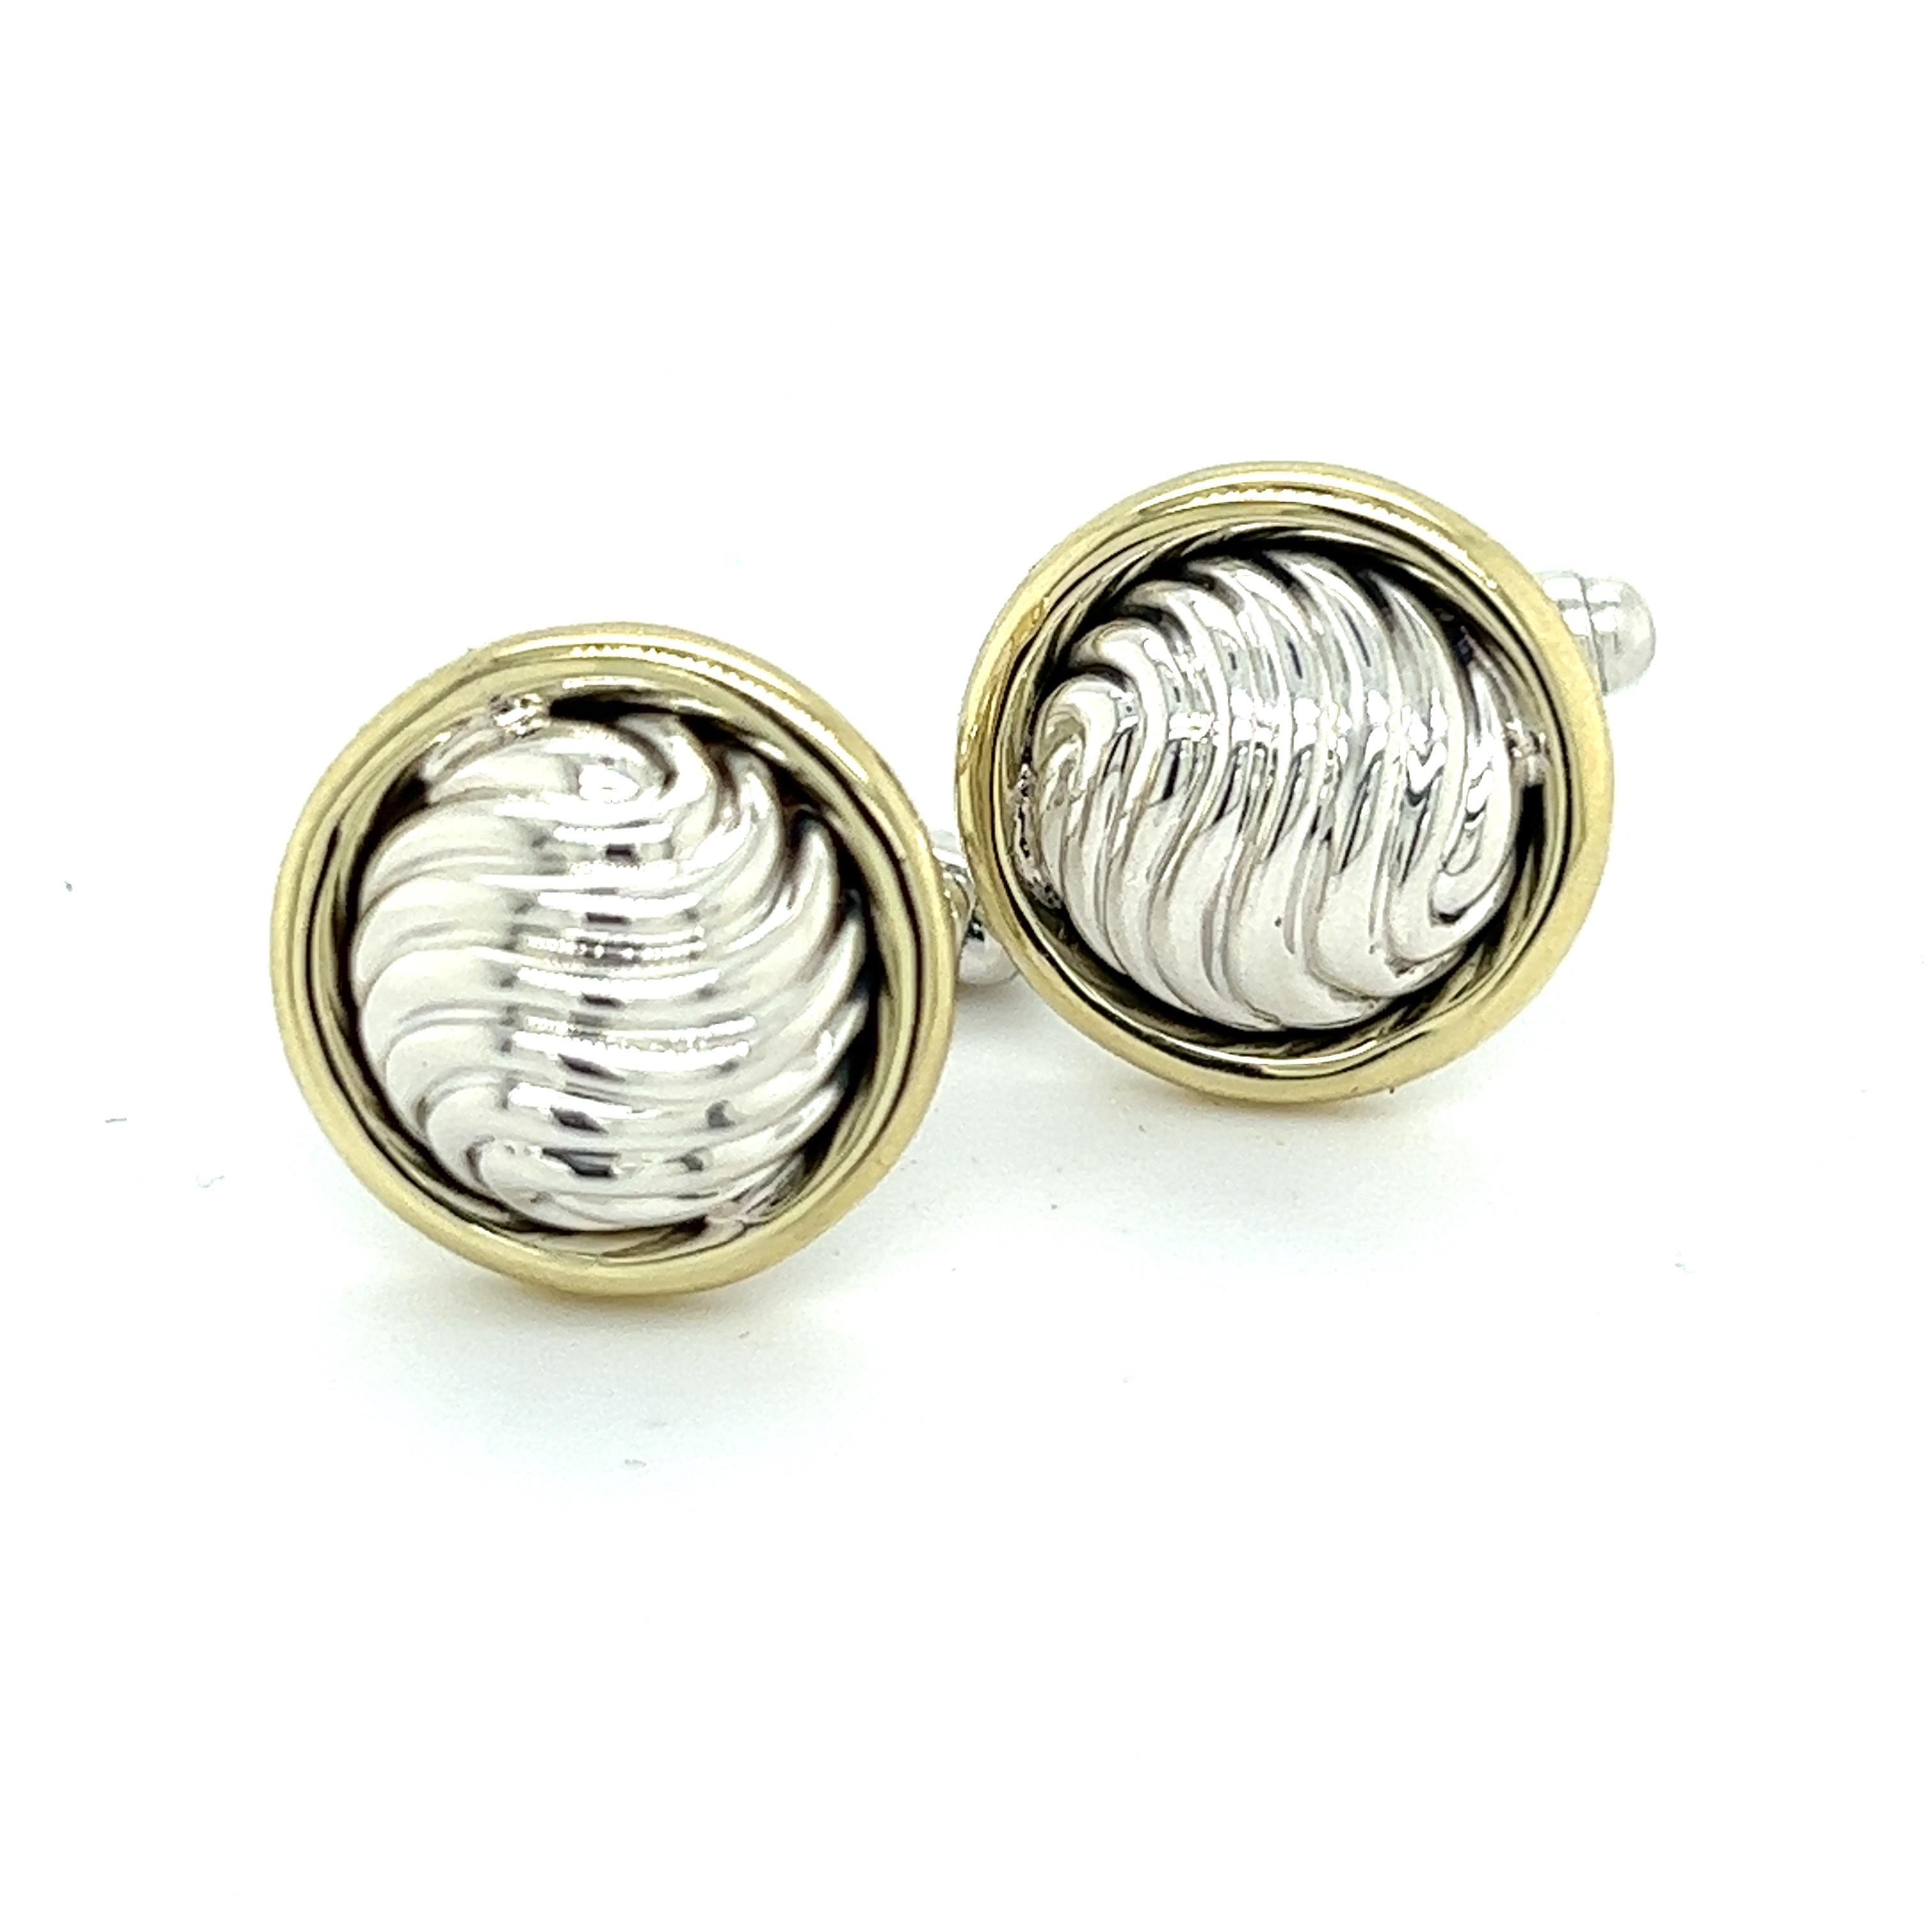 David Yurman Estate Cufflinks Sterling Silver + 14k Gold In Good Condition For Sale In Brooklyn, NY